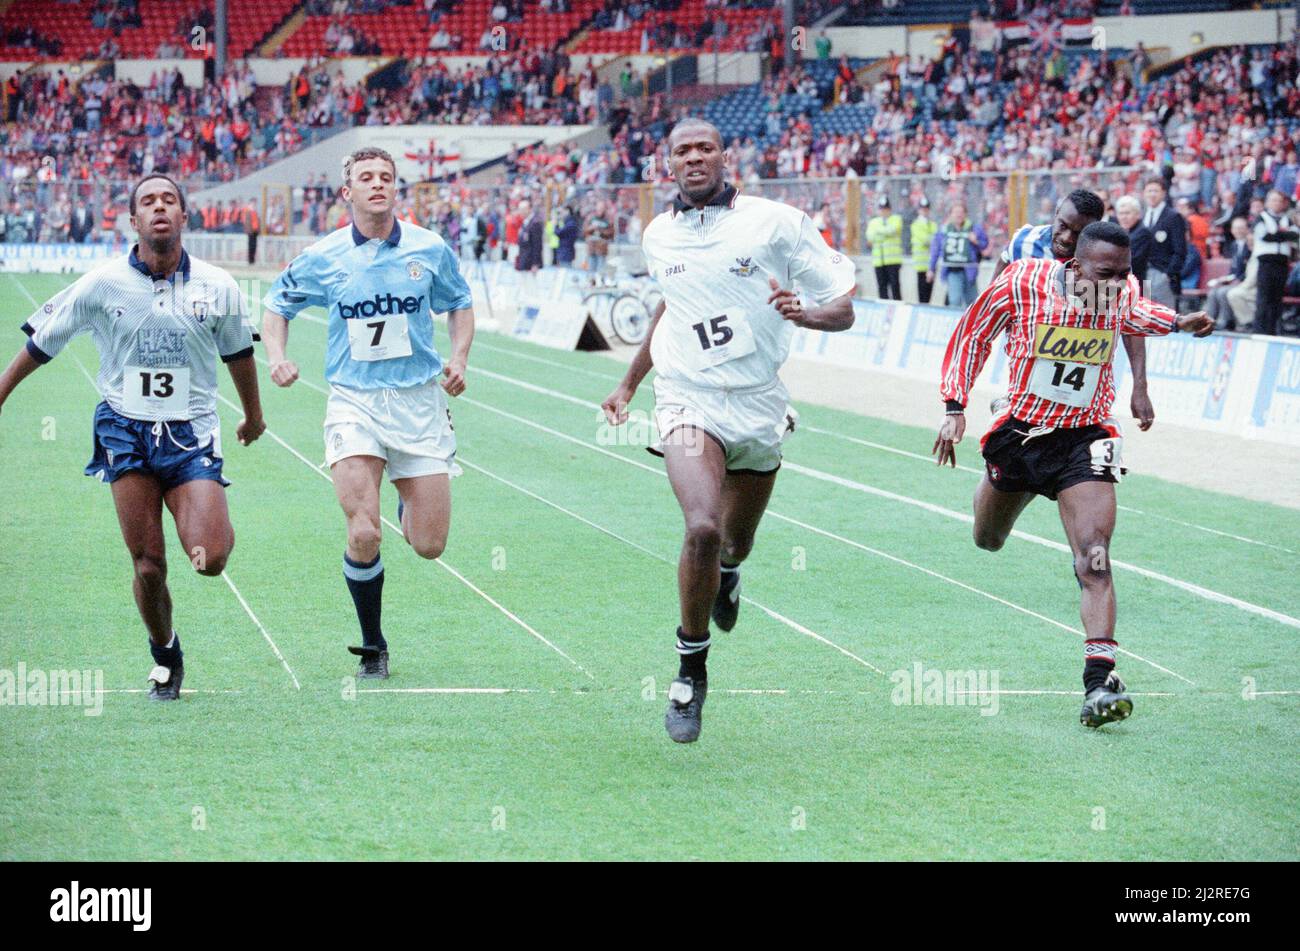 https://c8.alamy.com/comp/2J2RE7G/rumbelows-sprint-challenge-2nd-semi-final-wembley-stadium-sunday-12th-april-992-the-aim-of-the-challenge-was-to-find-the-fastest-player-in-the-league-each-club-is-invited-to-send-its-fastest-player-to-regional-heats-with-the-fastest-2-from-each-and-the-fastest-4-losers-qualifying-for-the-final-the-players-had-to-run-100m-in-football-boots-and-normal-match-kit-on-grass-the-competition-was-won-by-john-williams-of-swansea-city-who-collected-ten-thousand-pounds-pictured-no-13-michael-gilkes-reading-no-7-keith-curle-manchester-city-no-15-john-williams-swansea-no-14-adrian-li-2J2RE7G.jpg